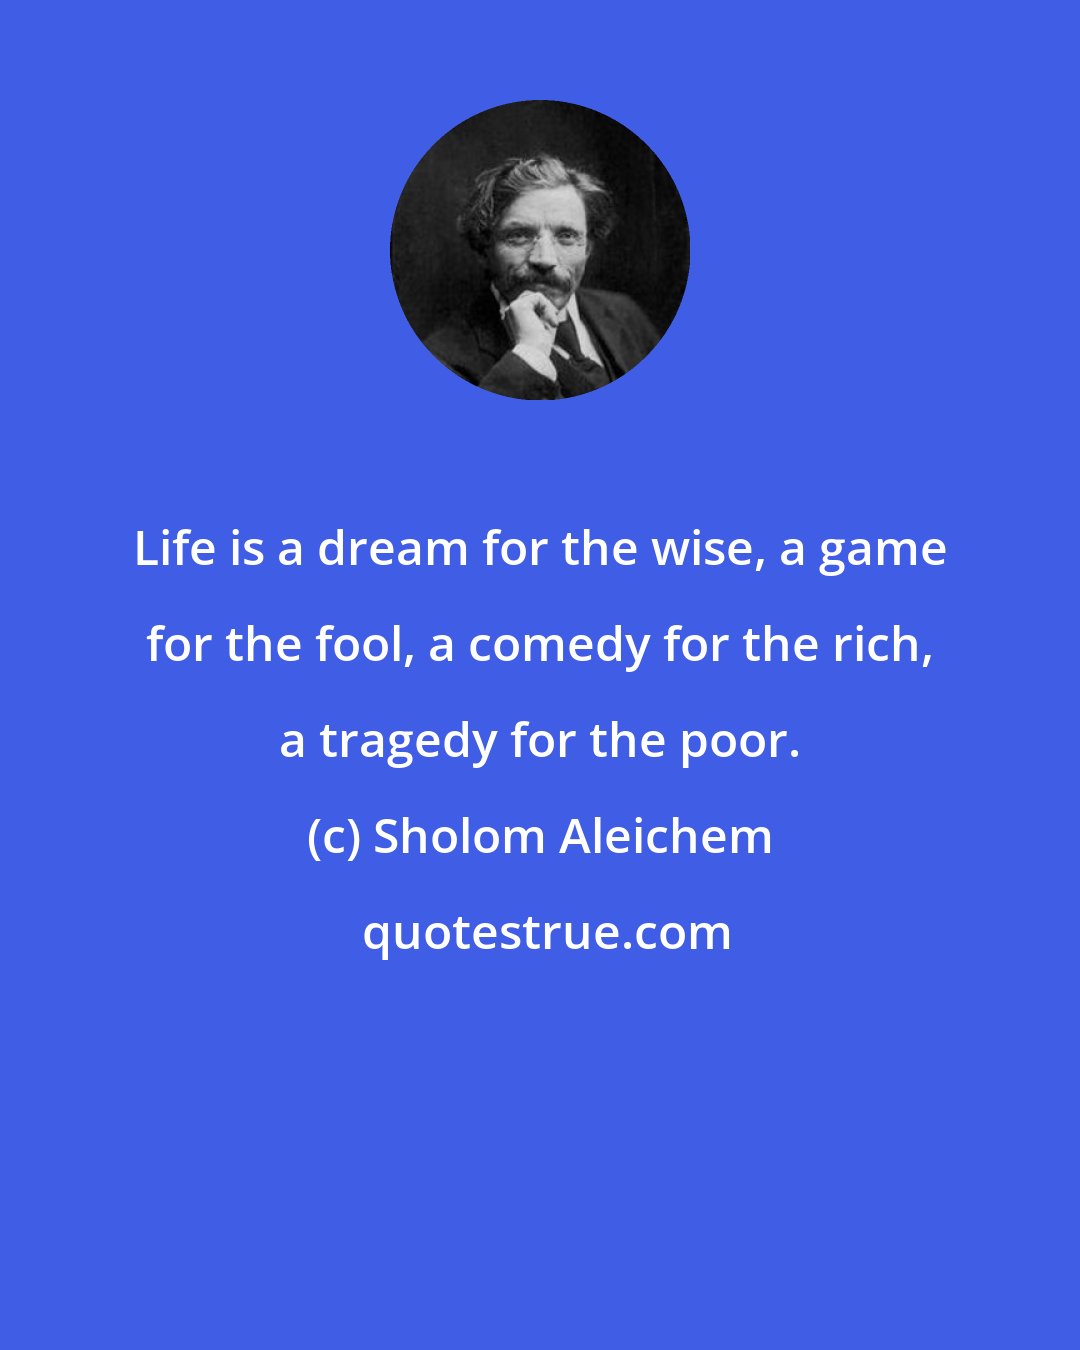 Sholom Aleichem: Life is a dream for the wise, a game for the fool, a comedy for the rich, a tragedy for the poor.